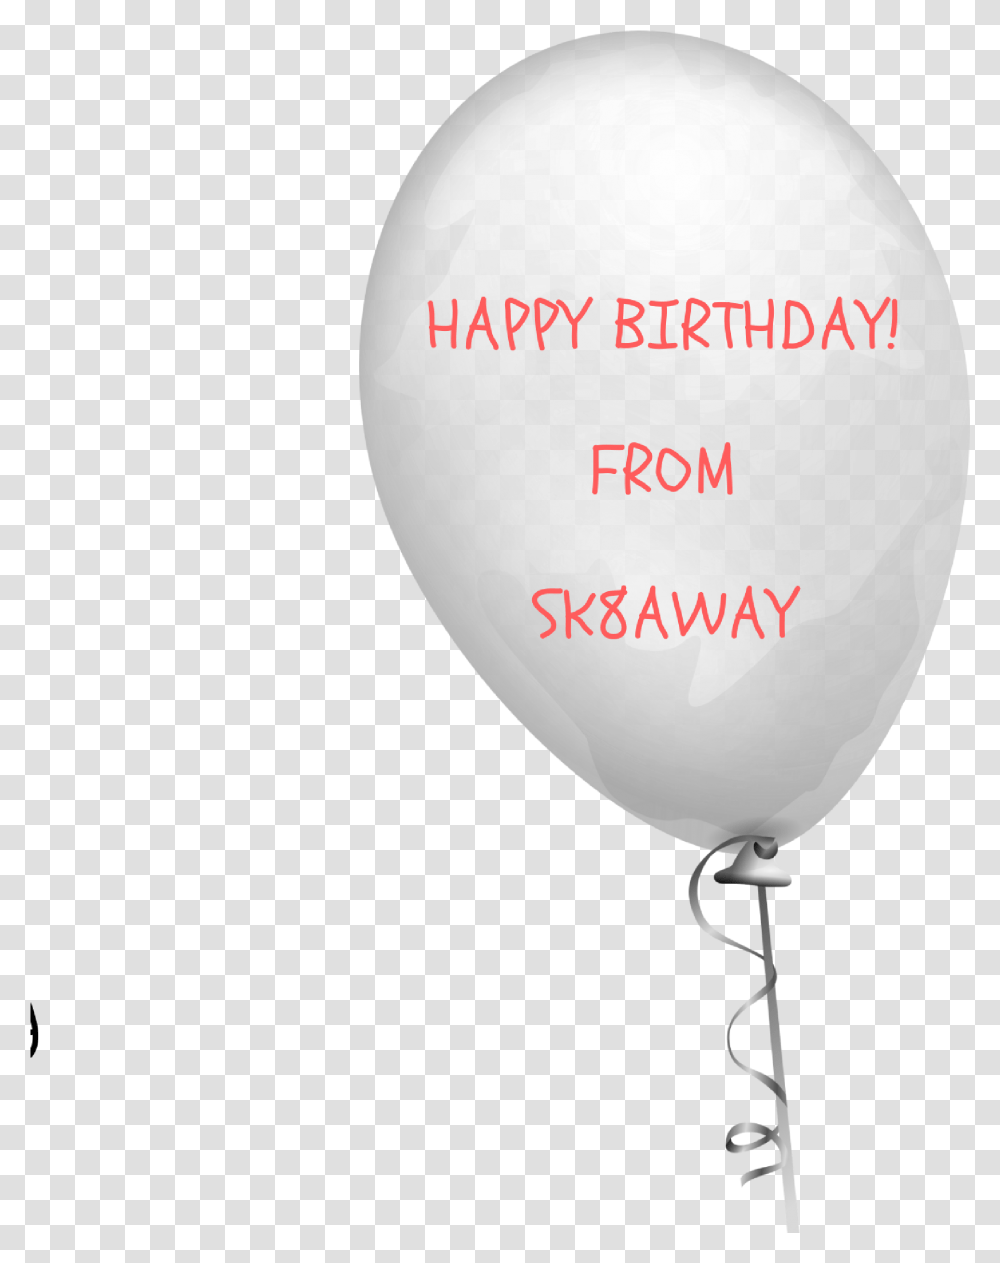 Private Glow Birthday Bash Sk8away Party Balloons Transparent Png